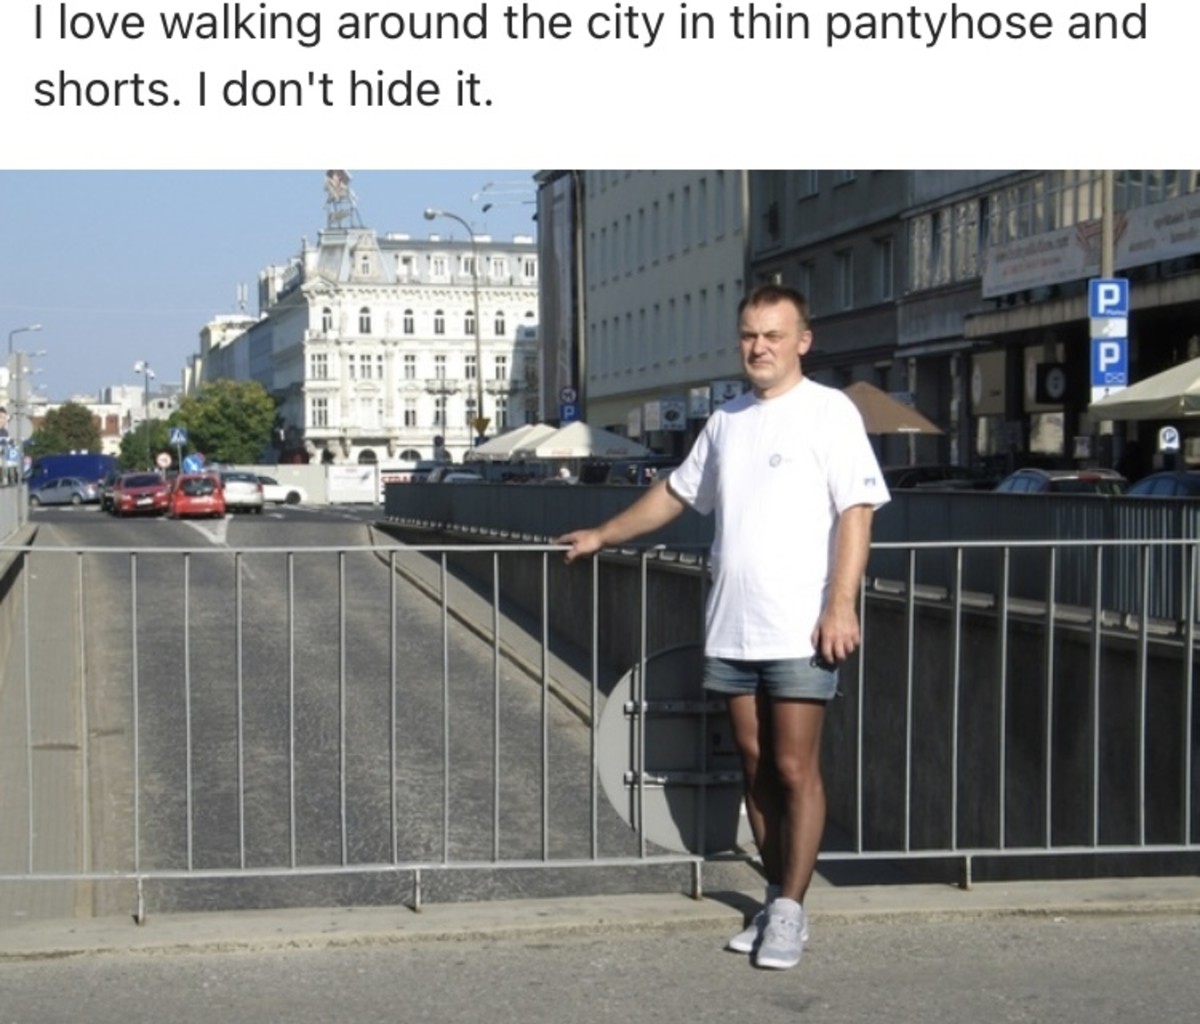 Pantyhose in Public: A Guide for Men - HubPages